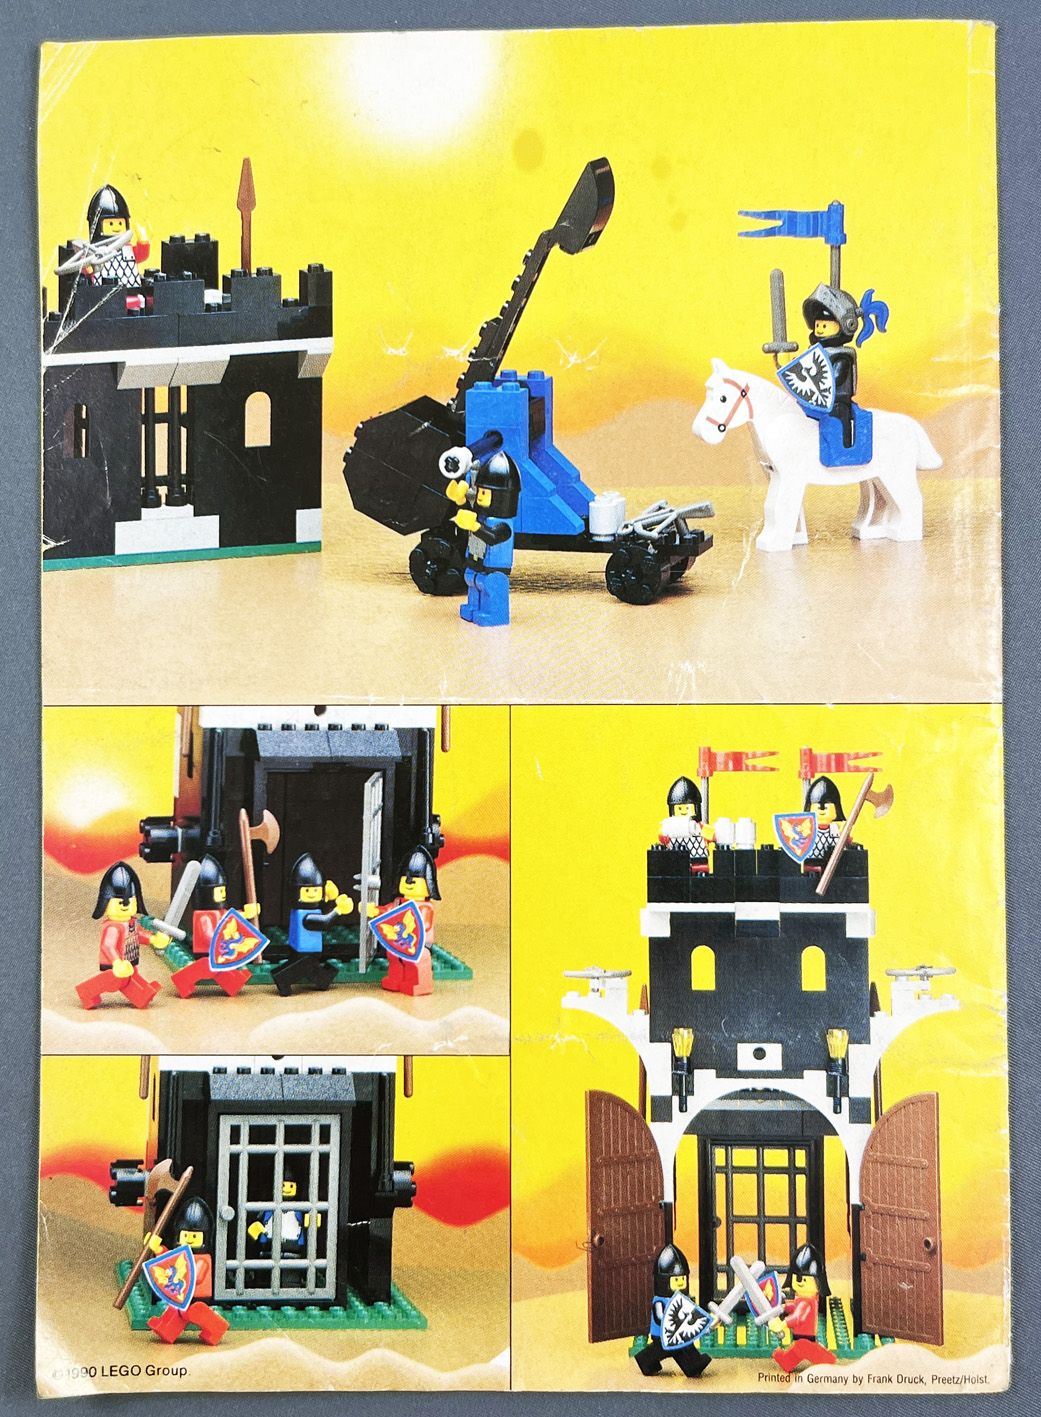 LEGO Ref.6059 - LEGOLAND Knight's Stronghold (Instructions Booklet)